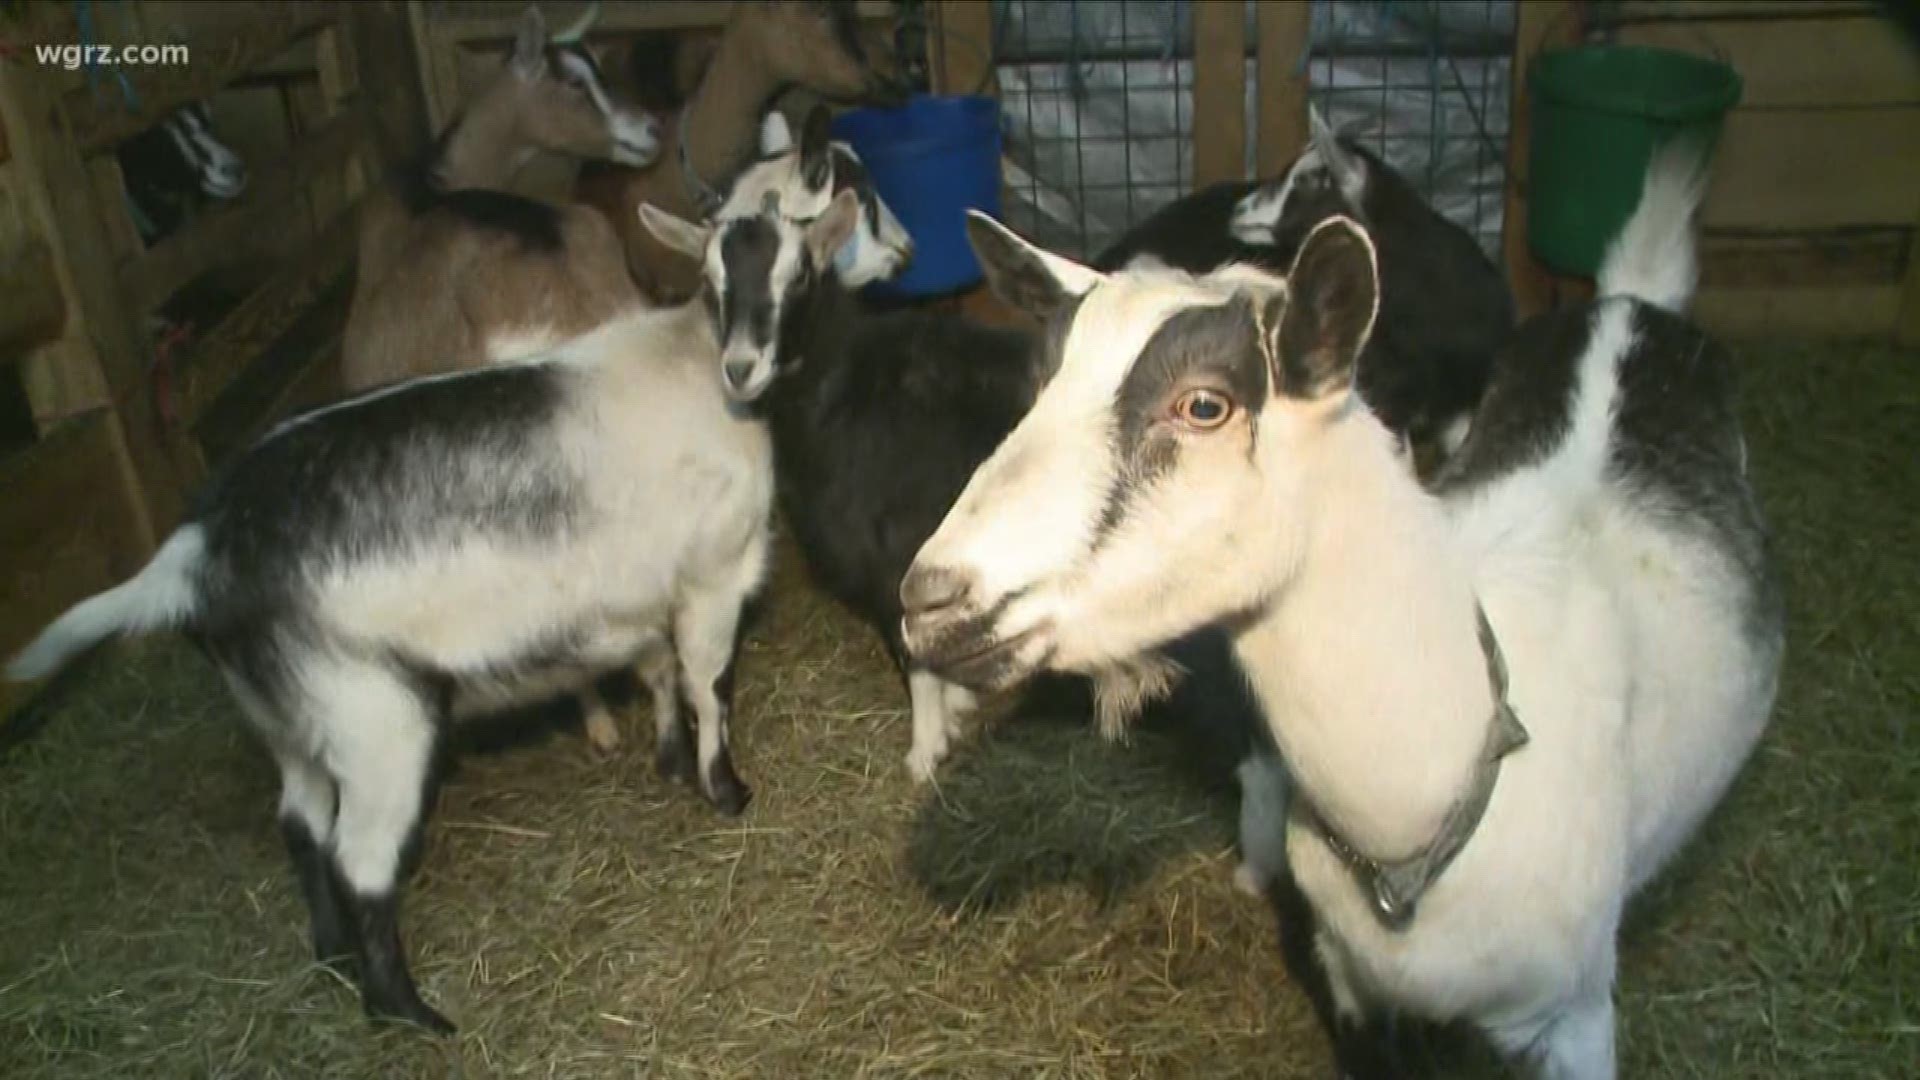 'Goatscapers' looking to expand the herd